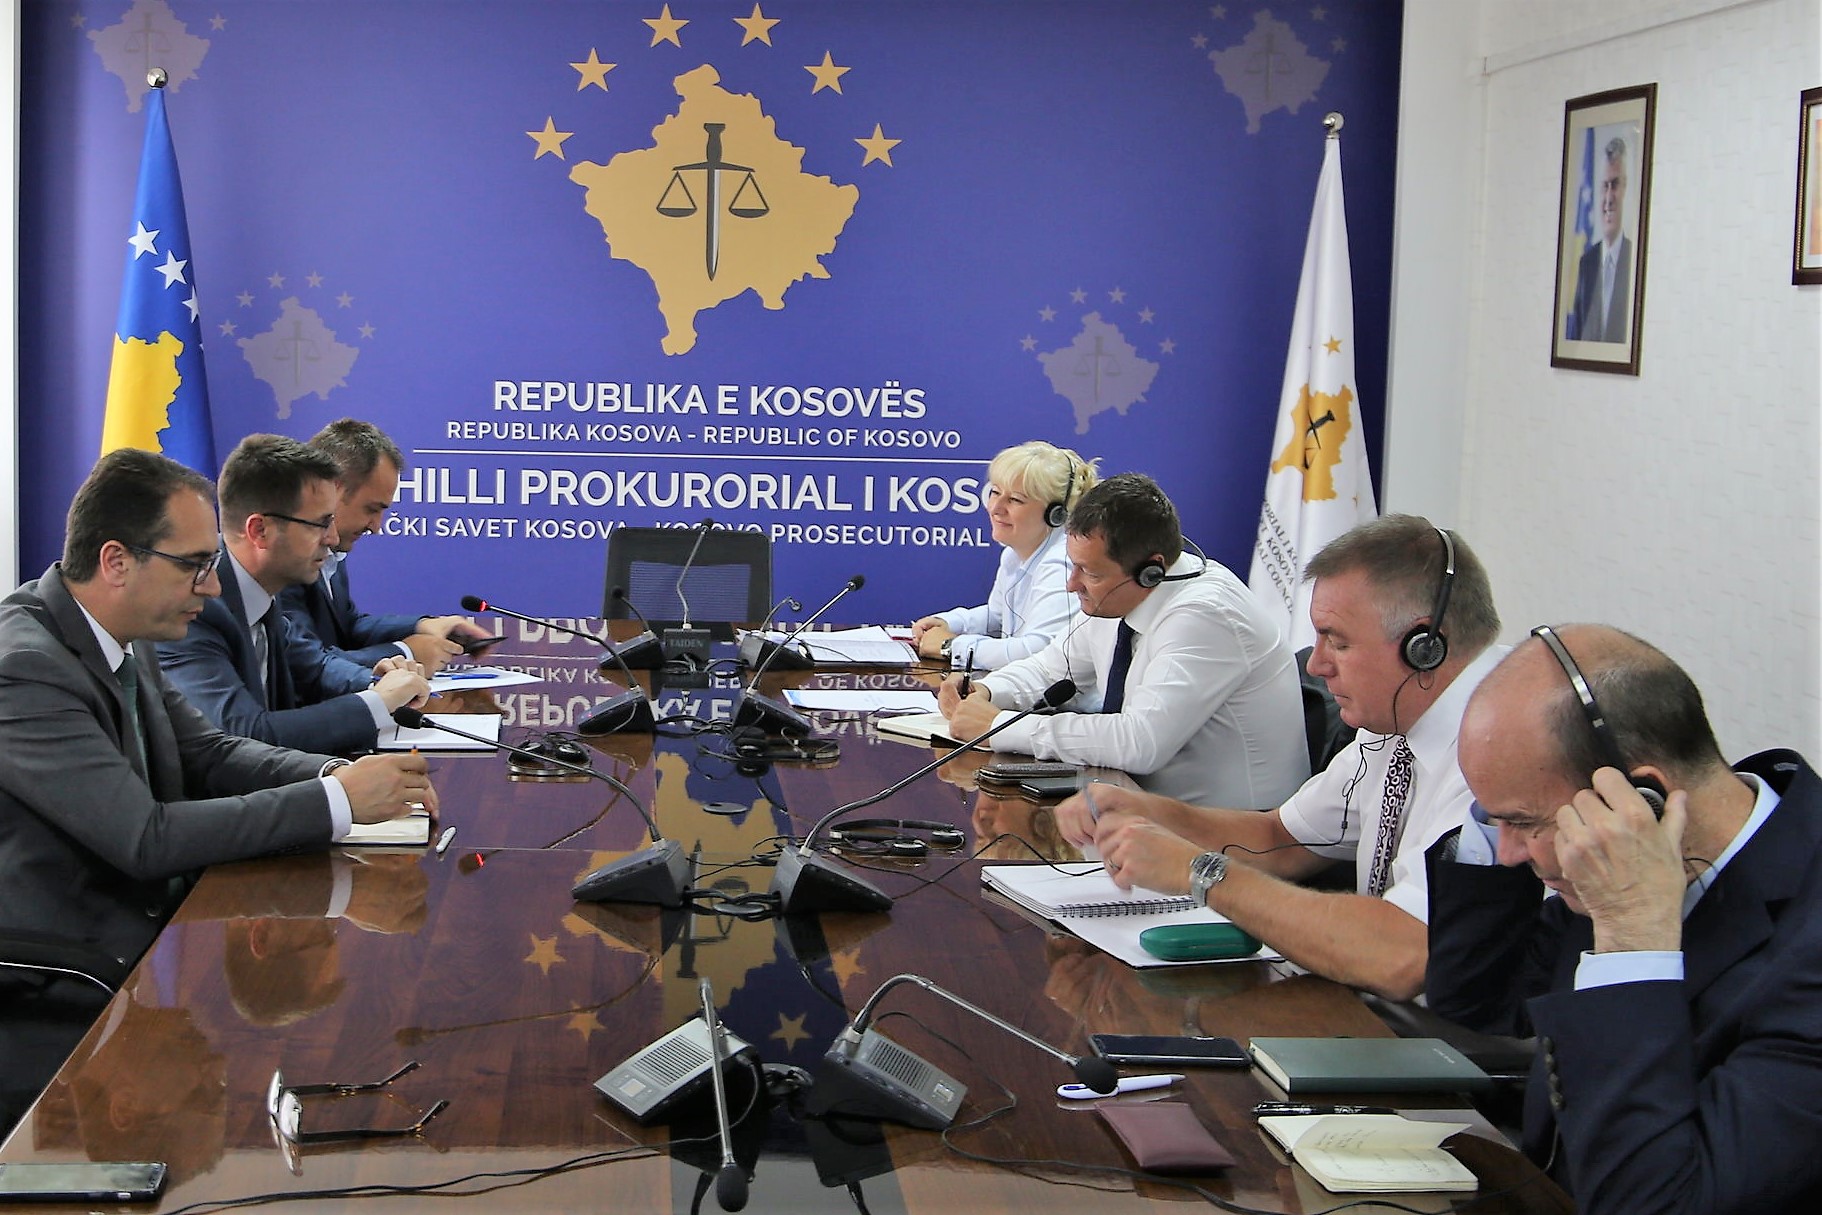 The British project for strengthening the prosecutorial system is evaluated